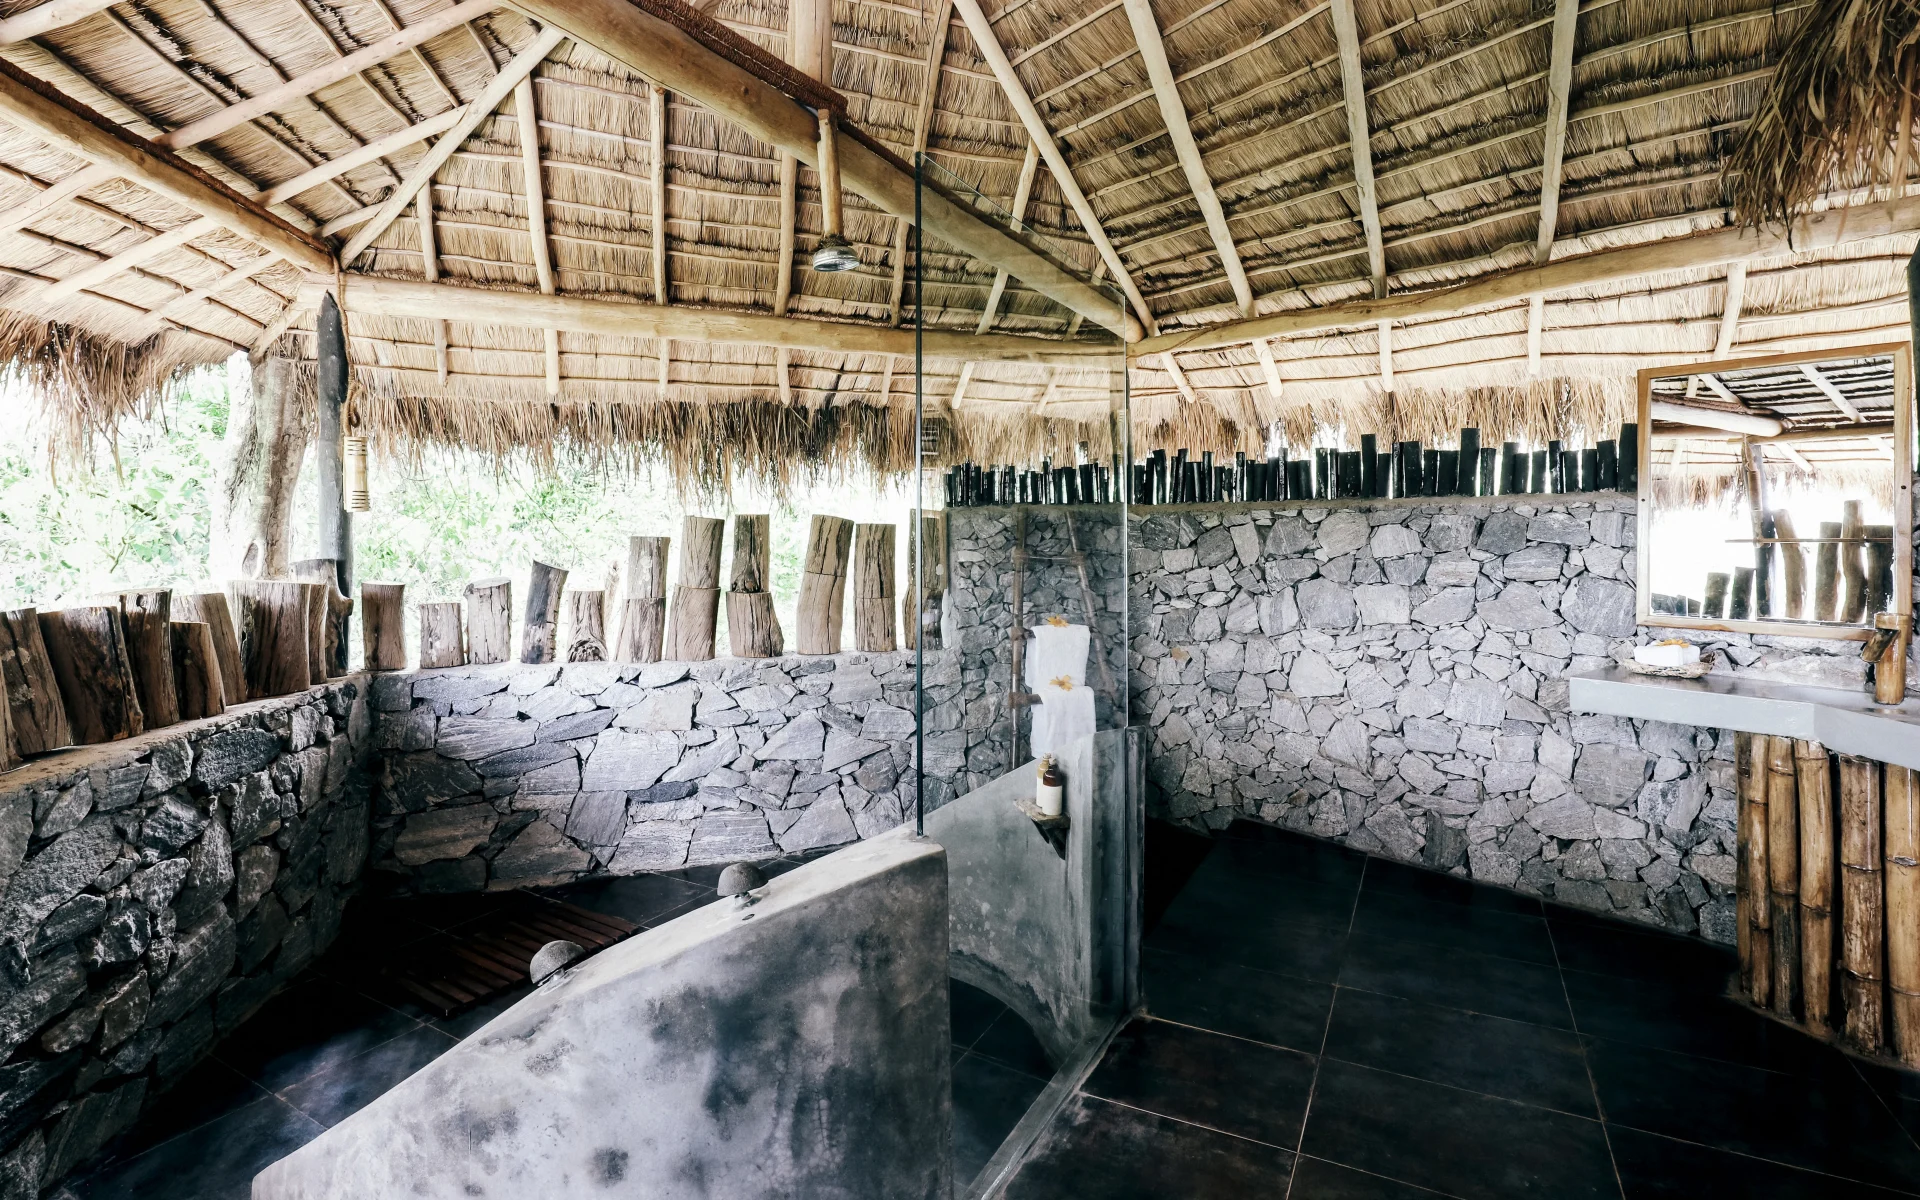 The bathrooms at the lodge have tiled floors and stone walls, equipped with huge walk-in showers.